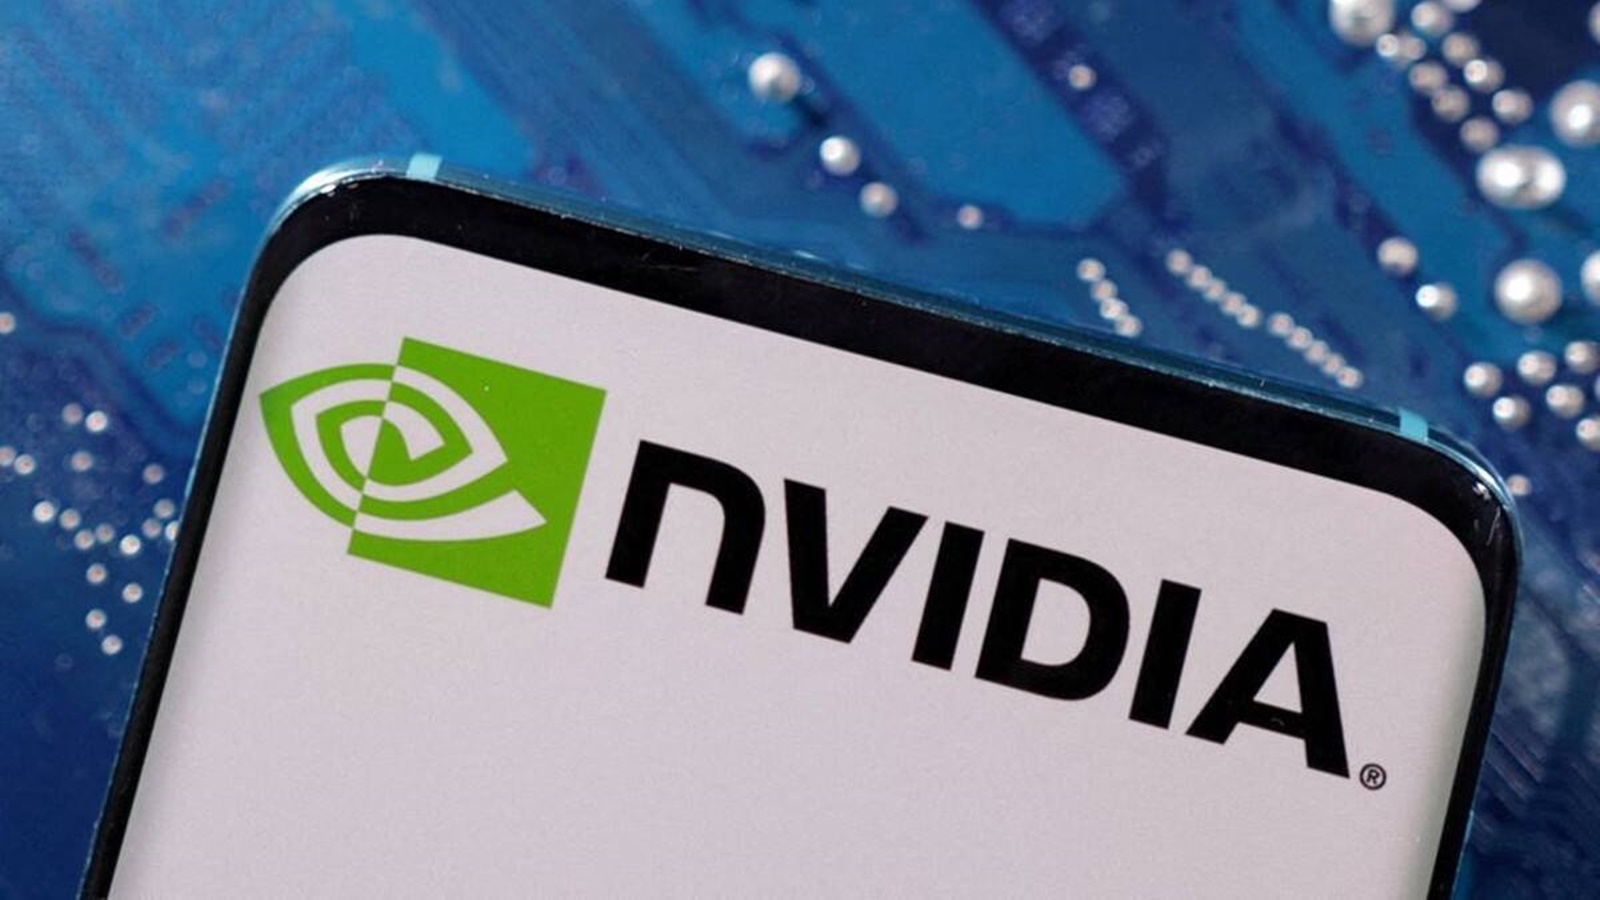 Nvidia delays launch of new China-focused AI chip | Technology News